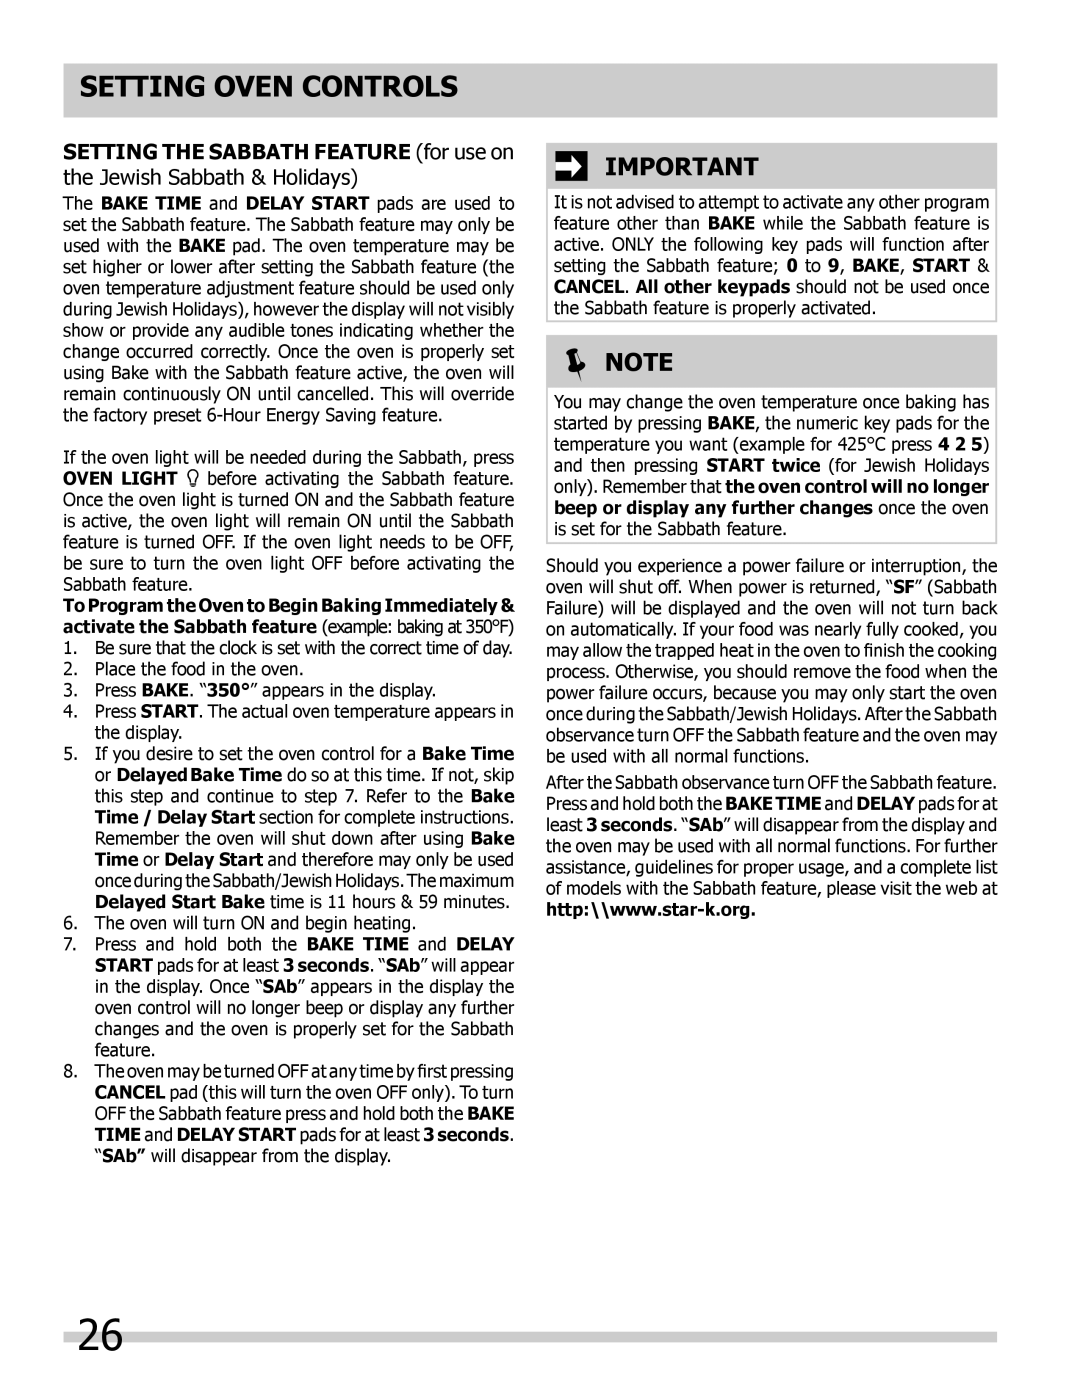 Frigidaire FGDS3065KF SETTING THE SABBATH FEATURE for use on, the Jewish Sabbath & Holidays, Setting Oven Controls,  Note 